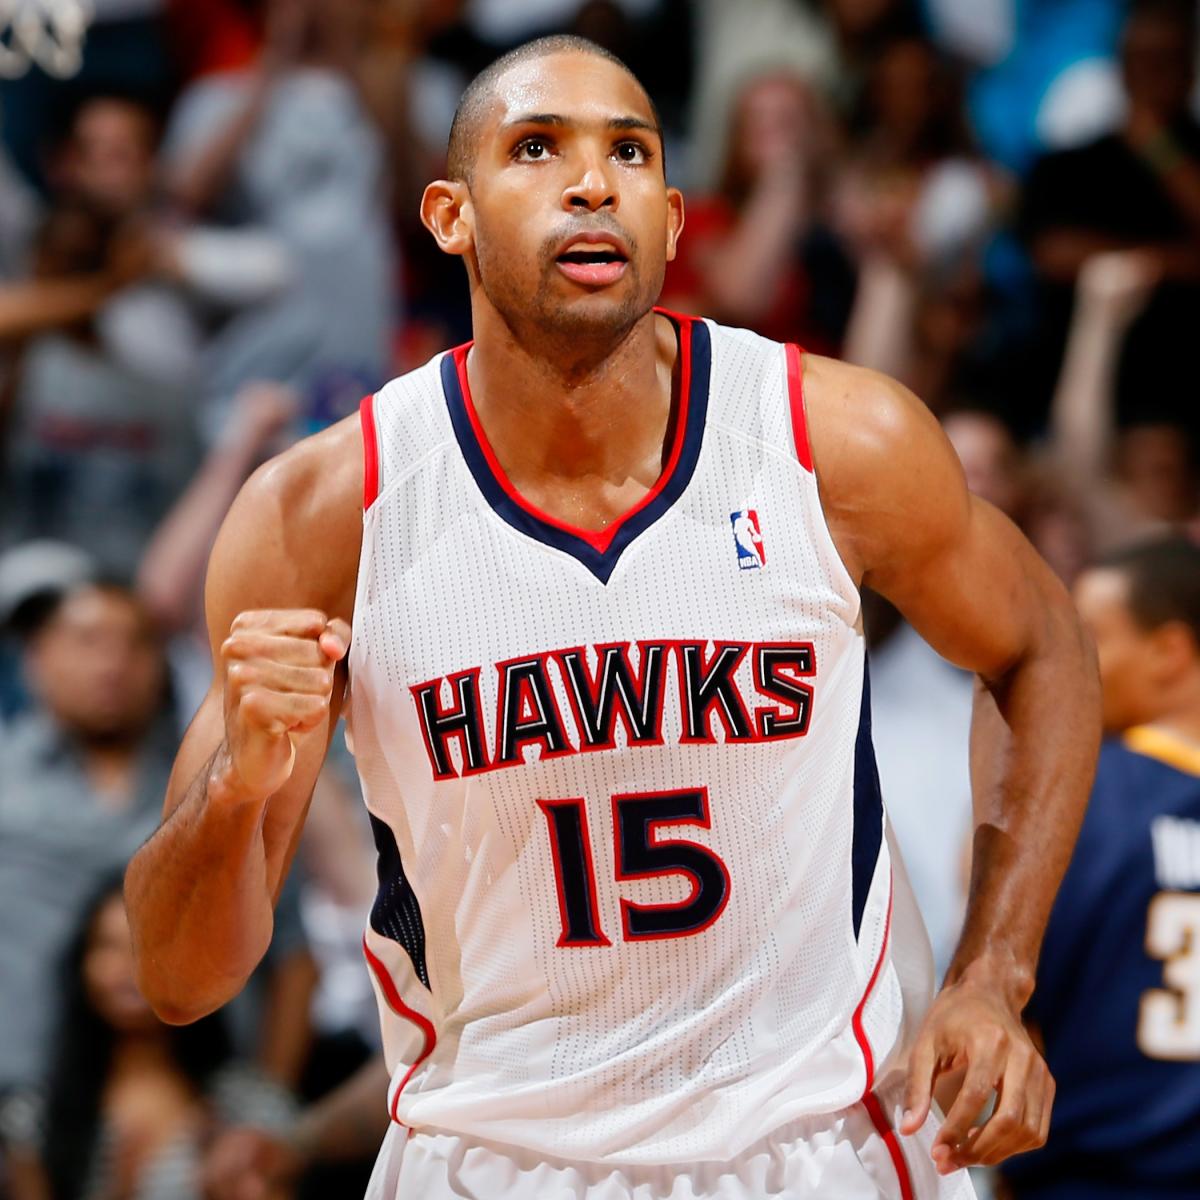 Checklist for Atlanta Hawks' Al Horford to Be Even Better This